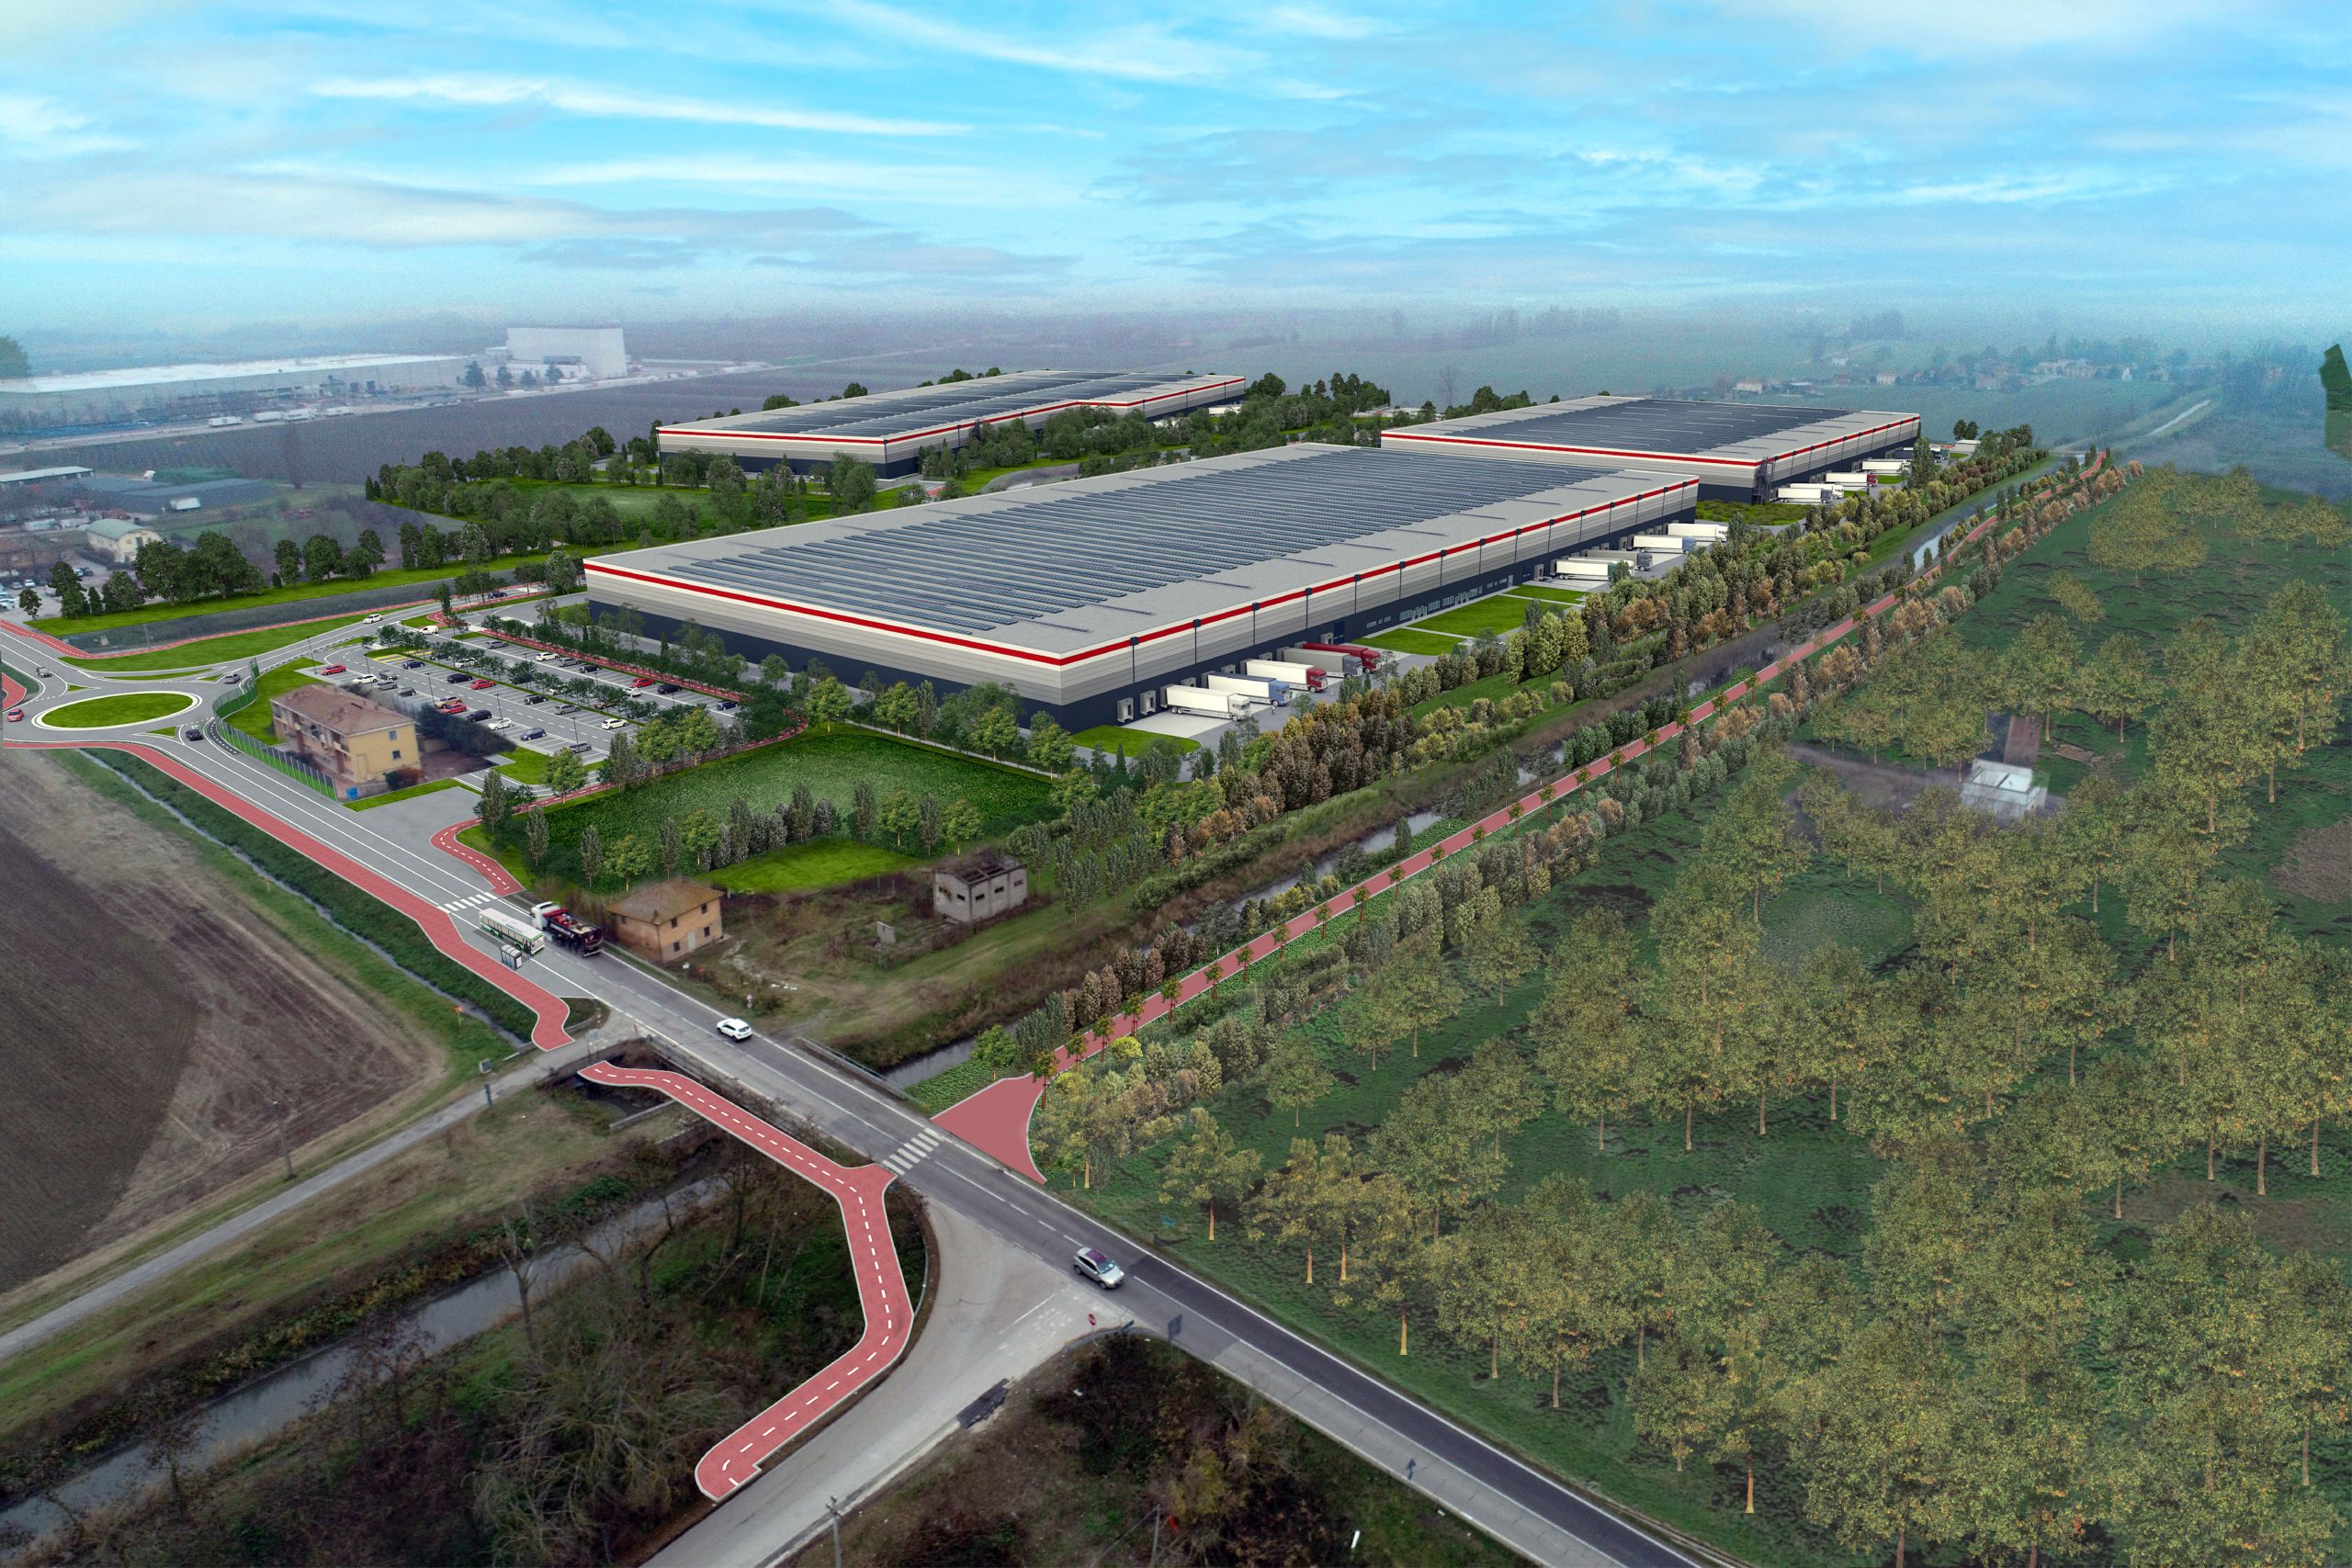 GSE ITALIA IN CHARGE OF THE CONSTRUCTION OF A LOGISTICS WAREHOUSE FOR P3 LOGISTIC PARKS